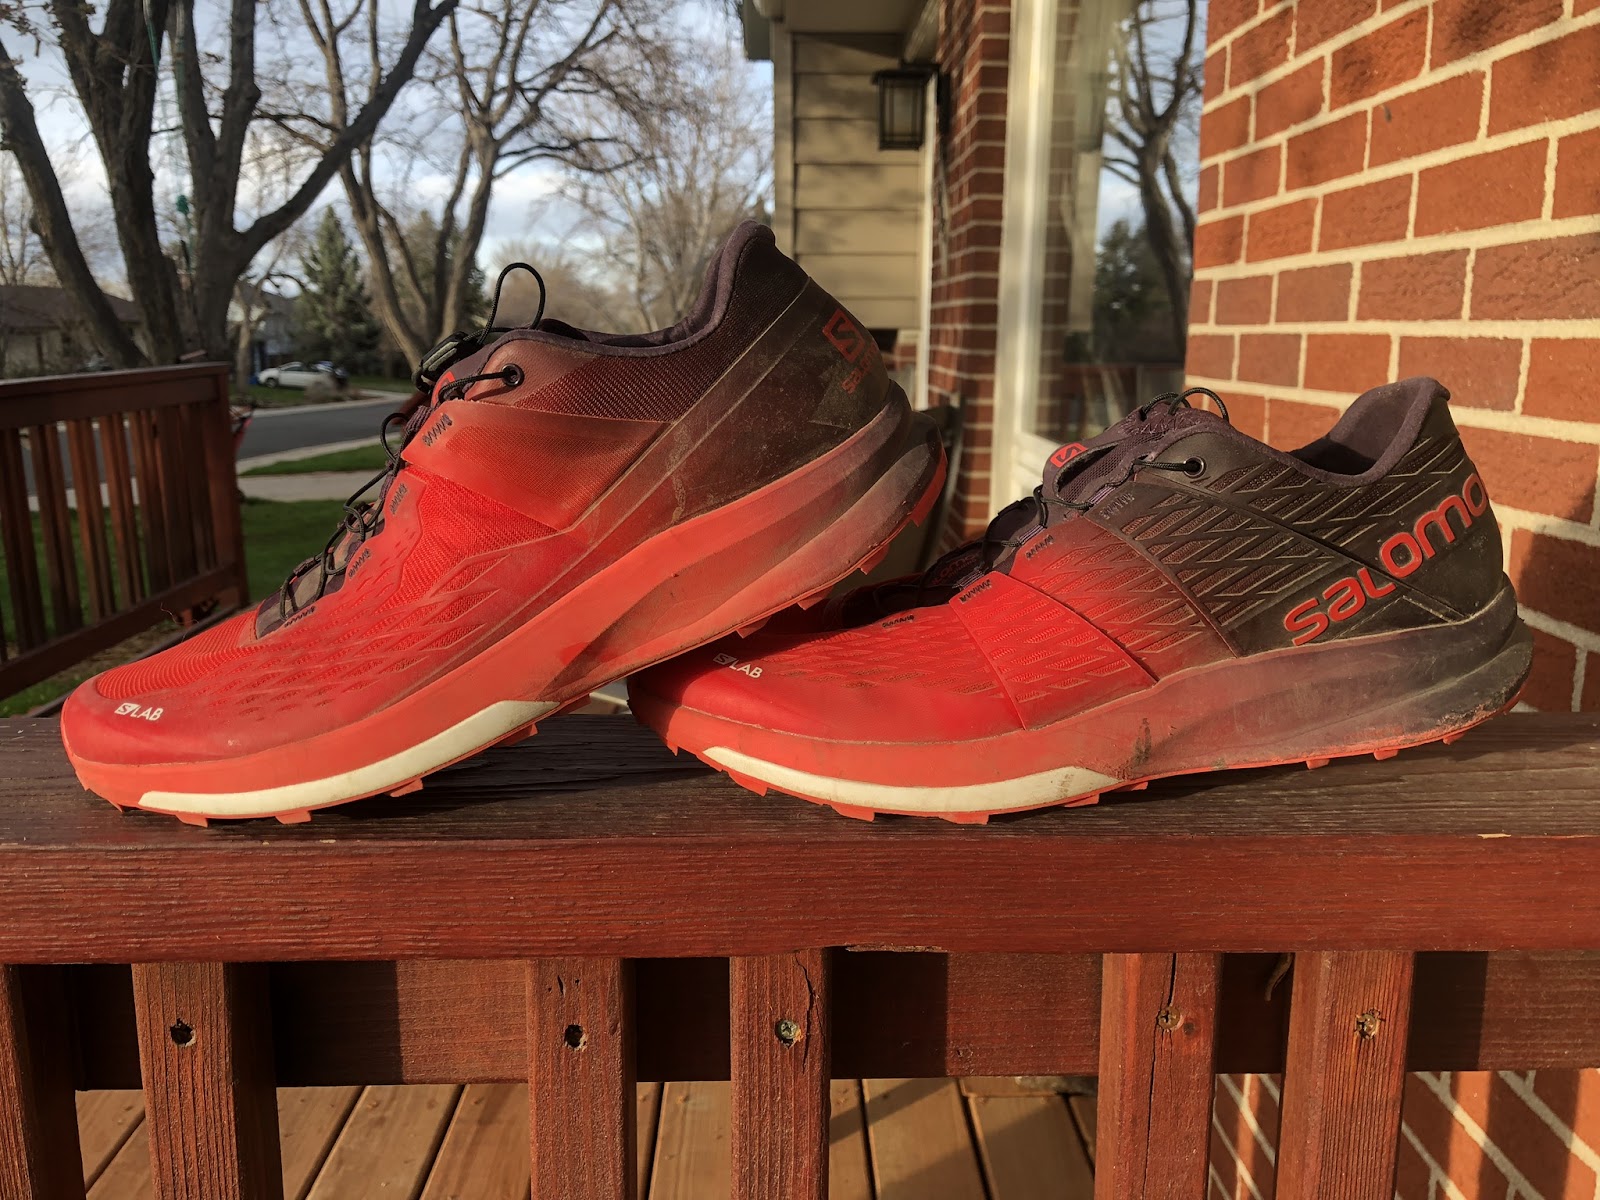 familie Hvor kort Road Trail Run: Salomon S/Lab Ultra 2 Full Review - Significant Upper &  Footshape Updates are a Winning Combination!